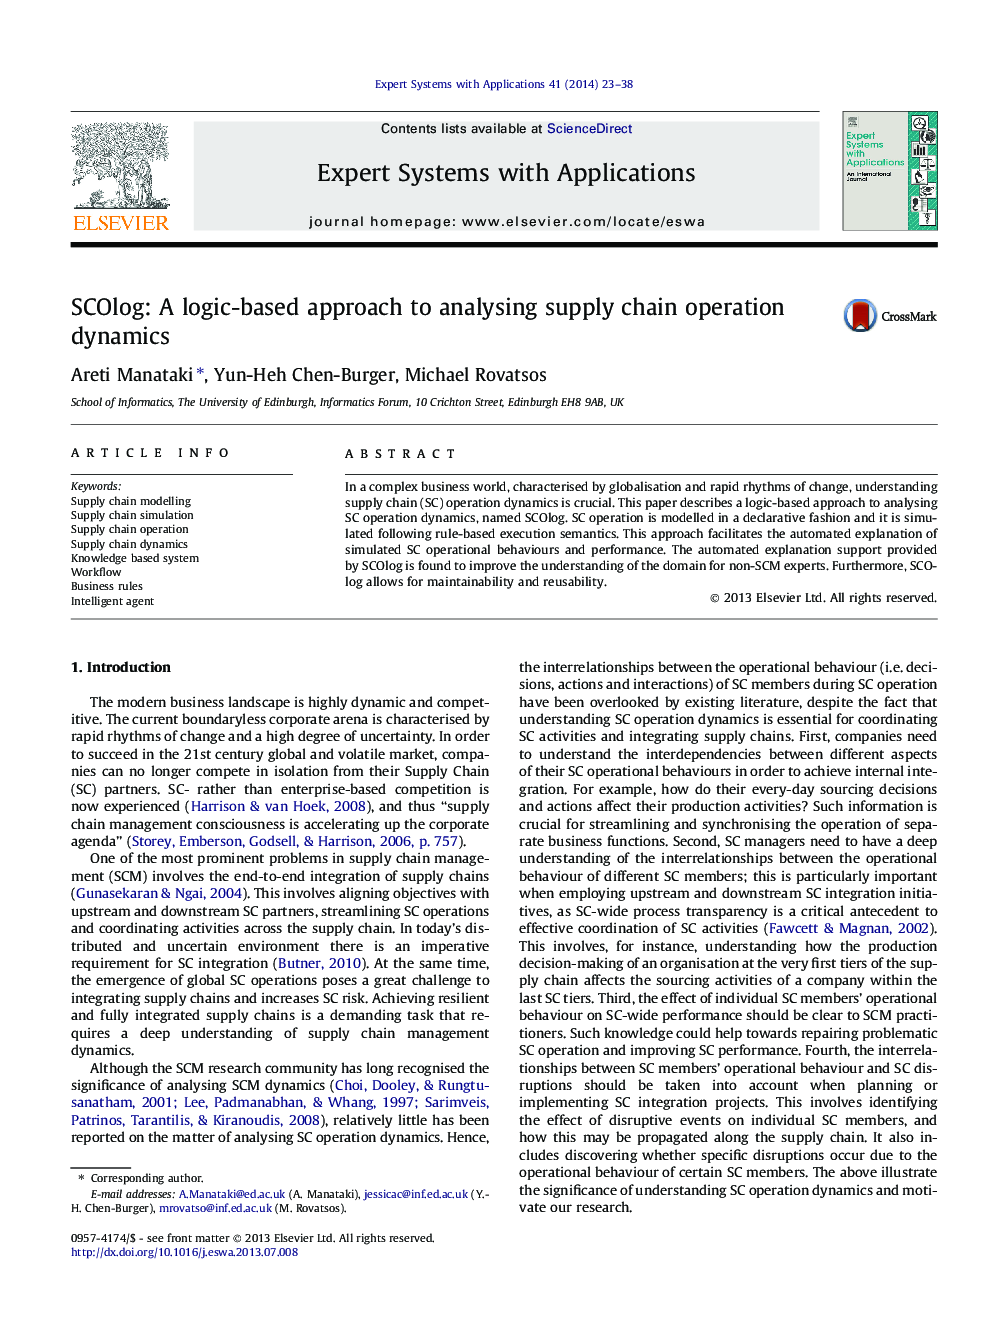 SCOlog: A logic-based approach to analysing supply chain operation dynamics